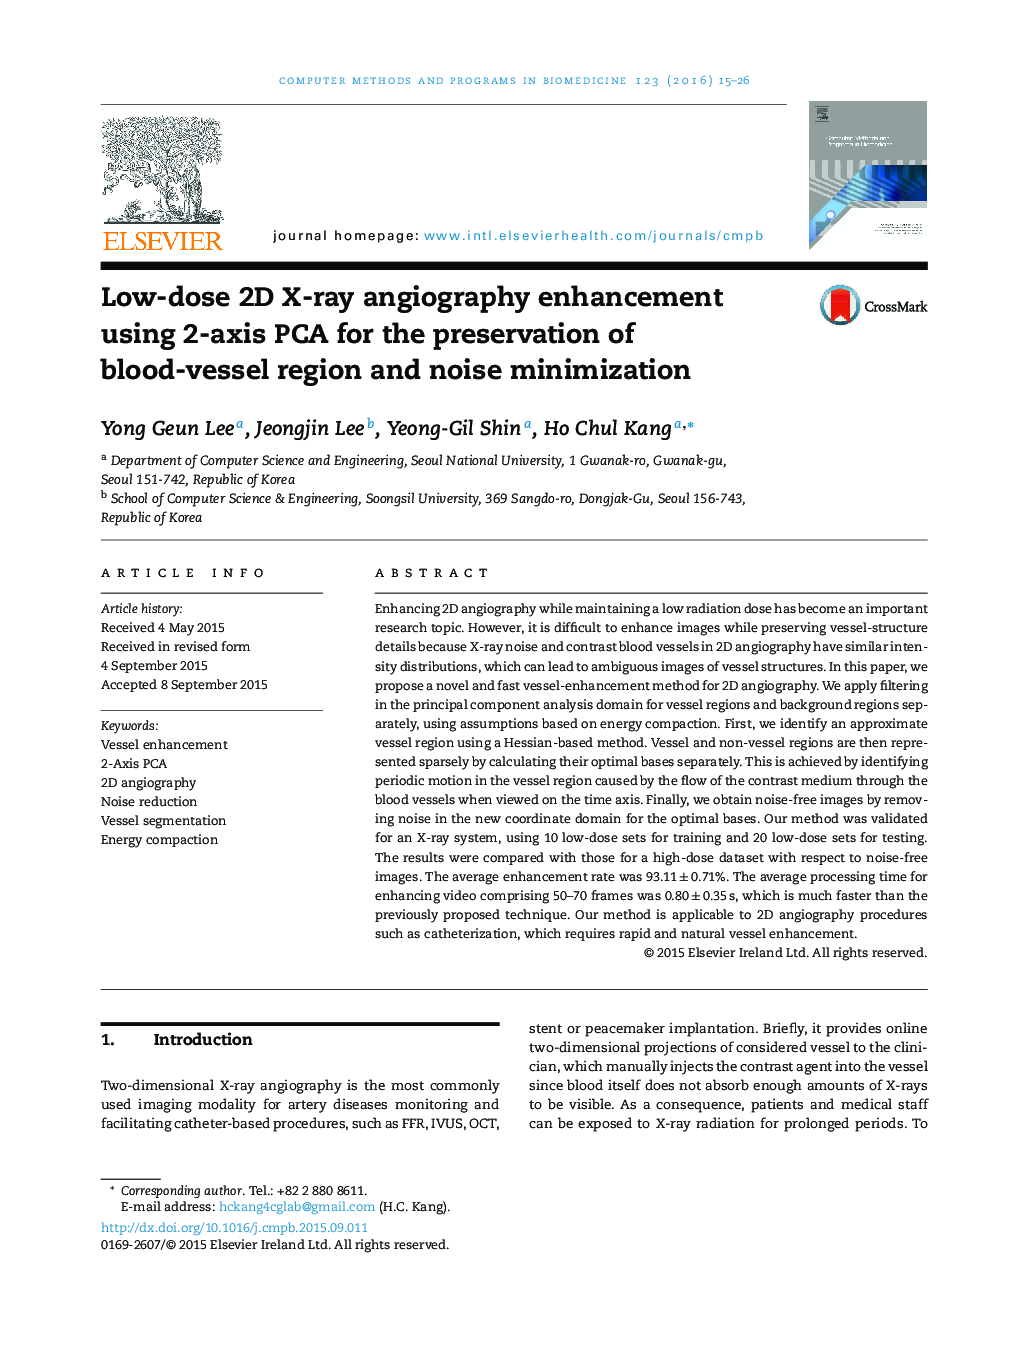 Low-dose 2D X-ray angiography enhancement using 2-axis PCA for the preservation of blood-vessel region and noise minimization